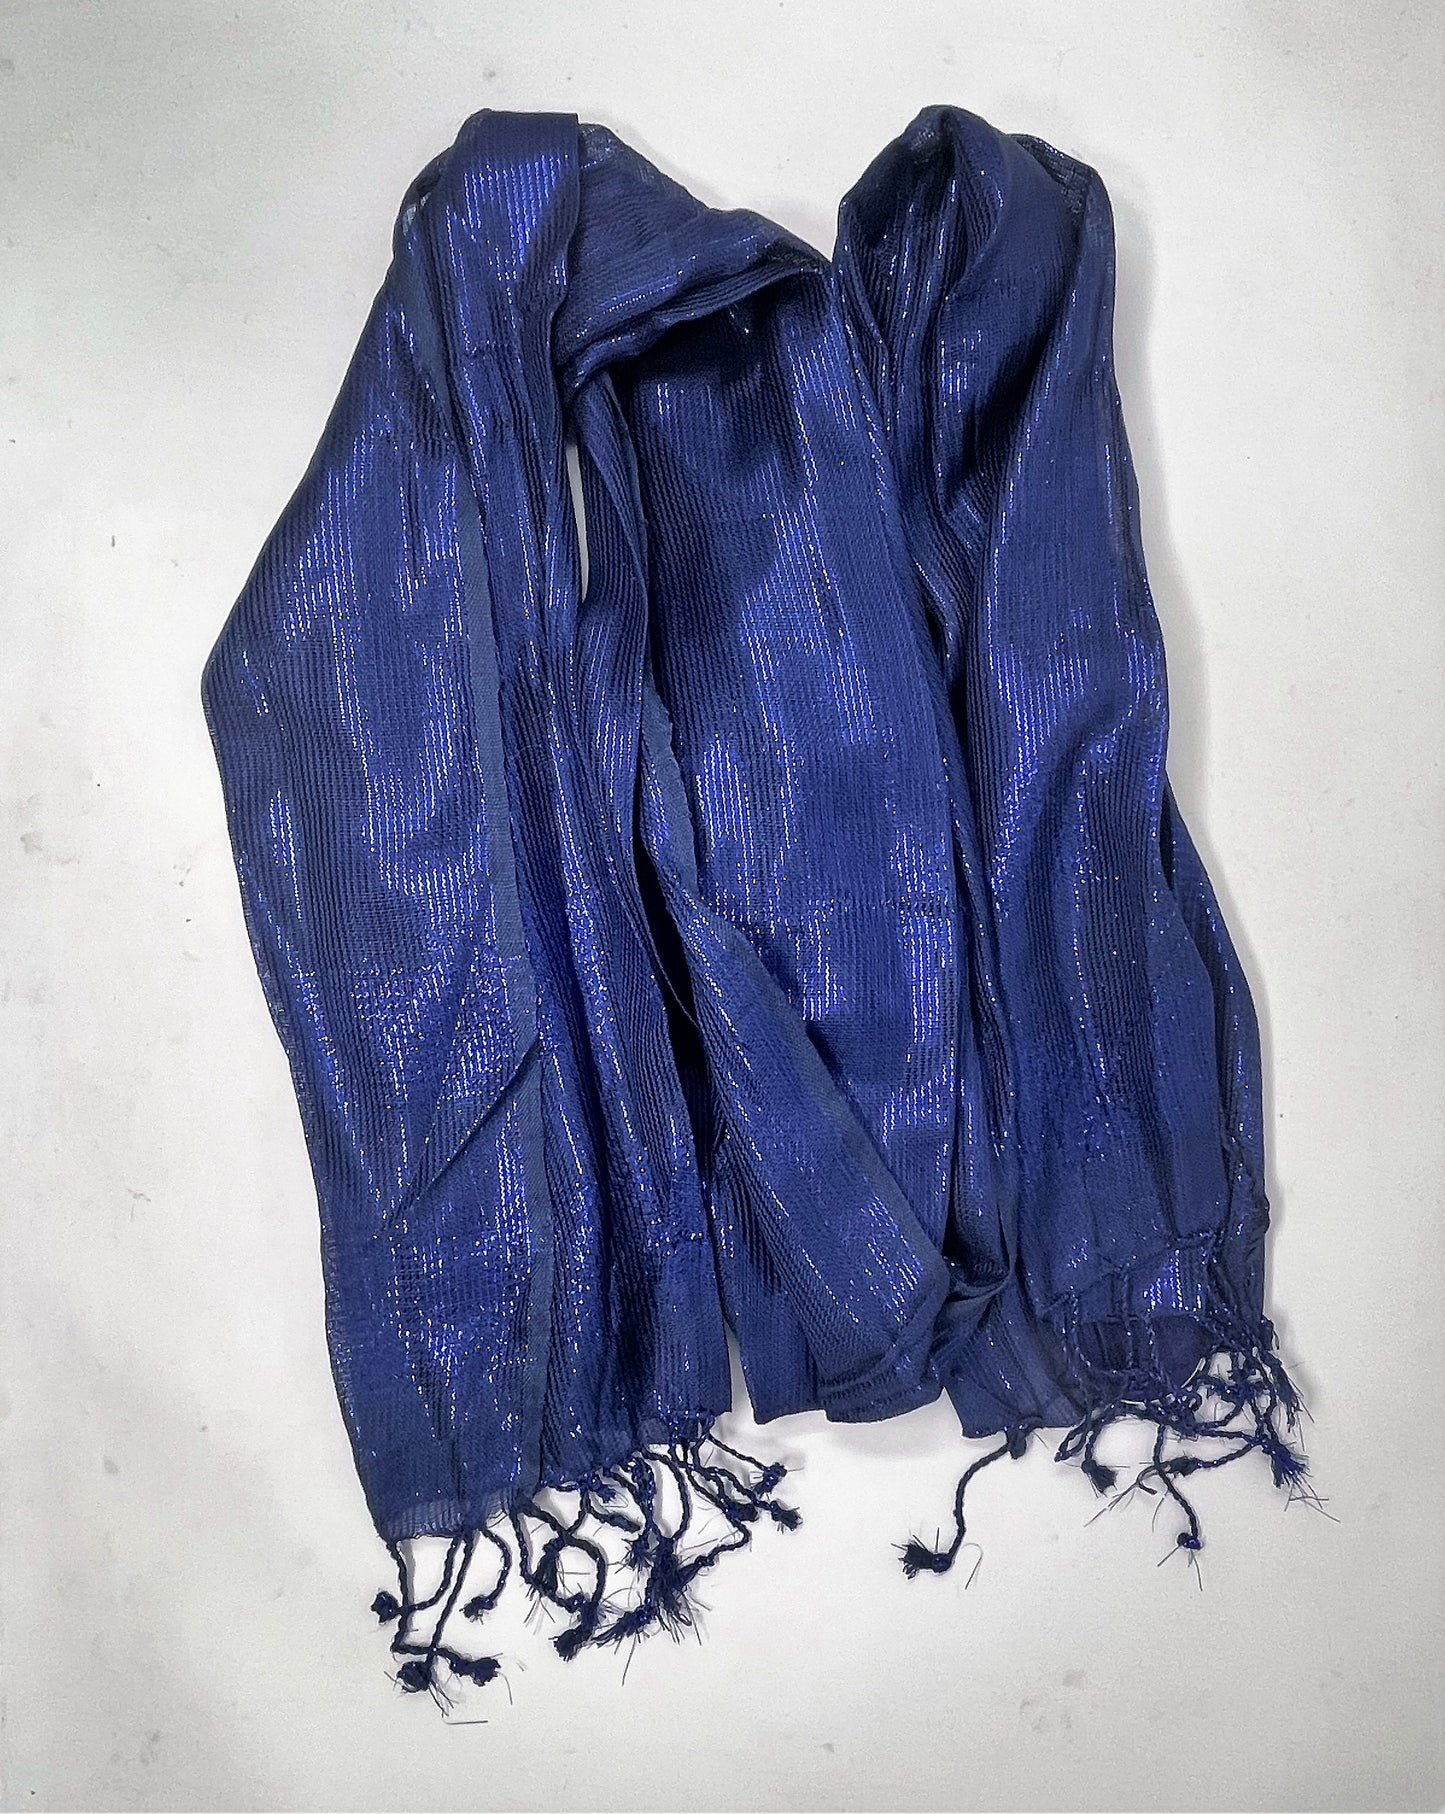 Best Blue with Blue Shimmering Accents Thin & Lightweight Fashion Scarves